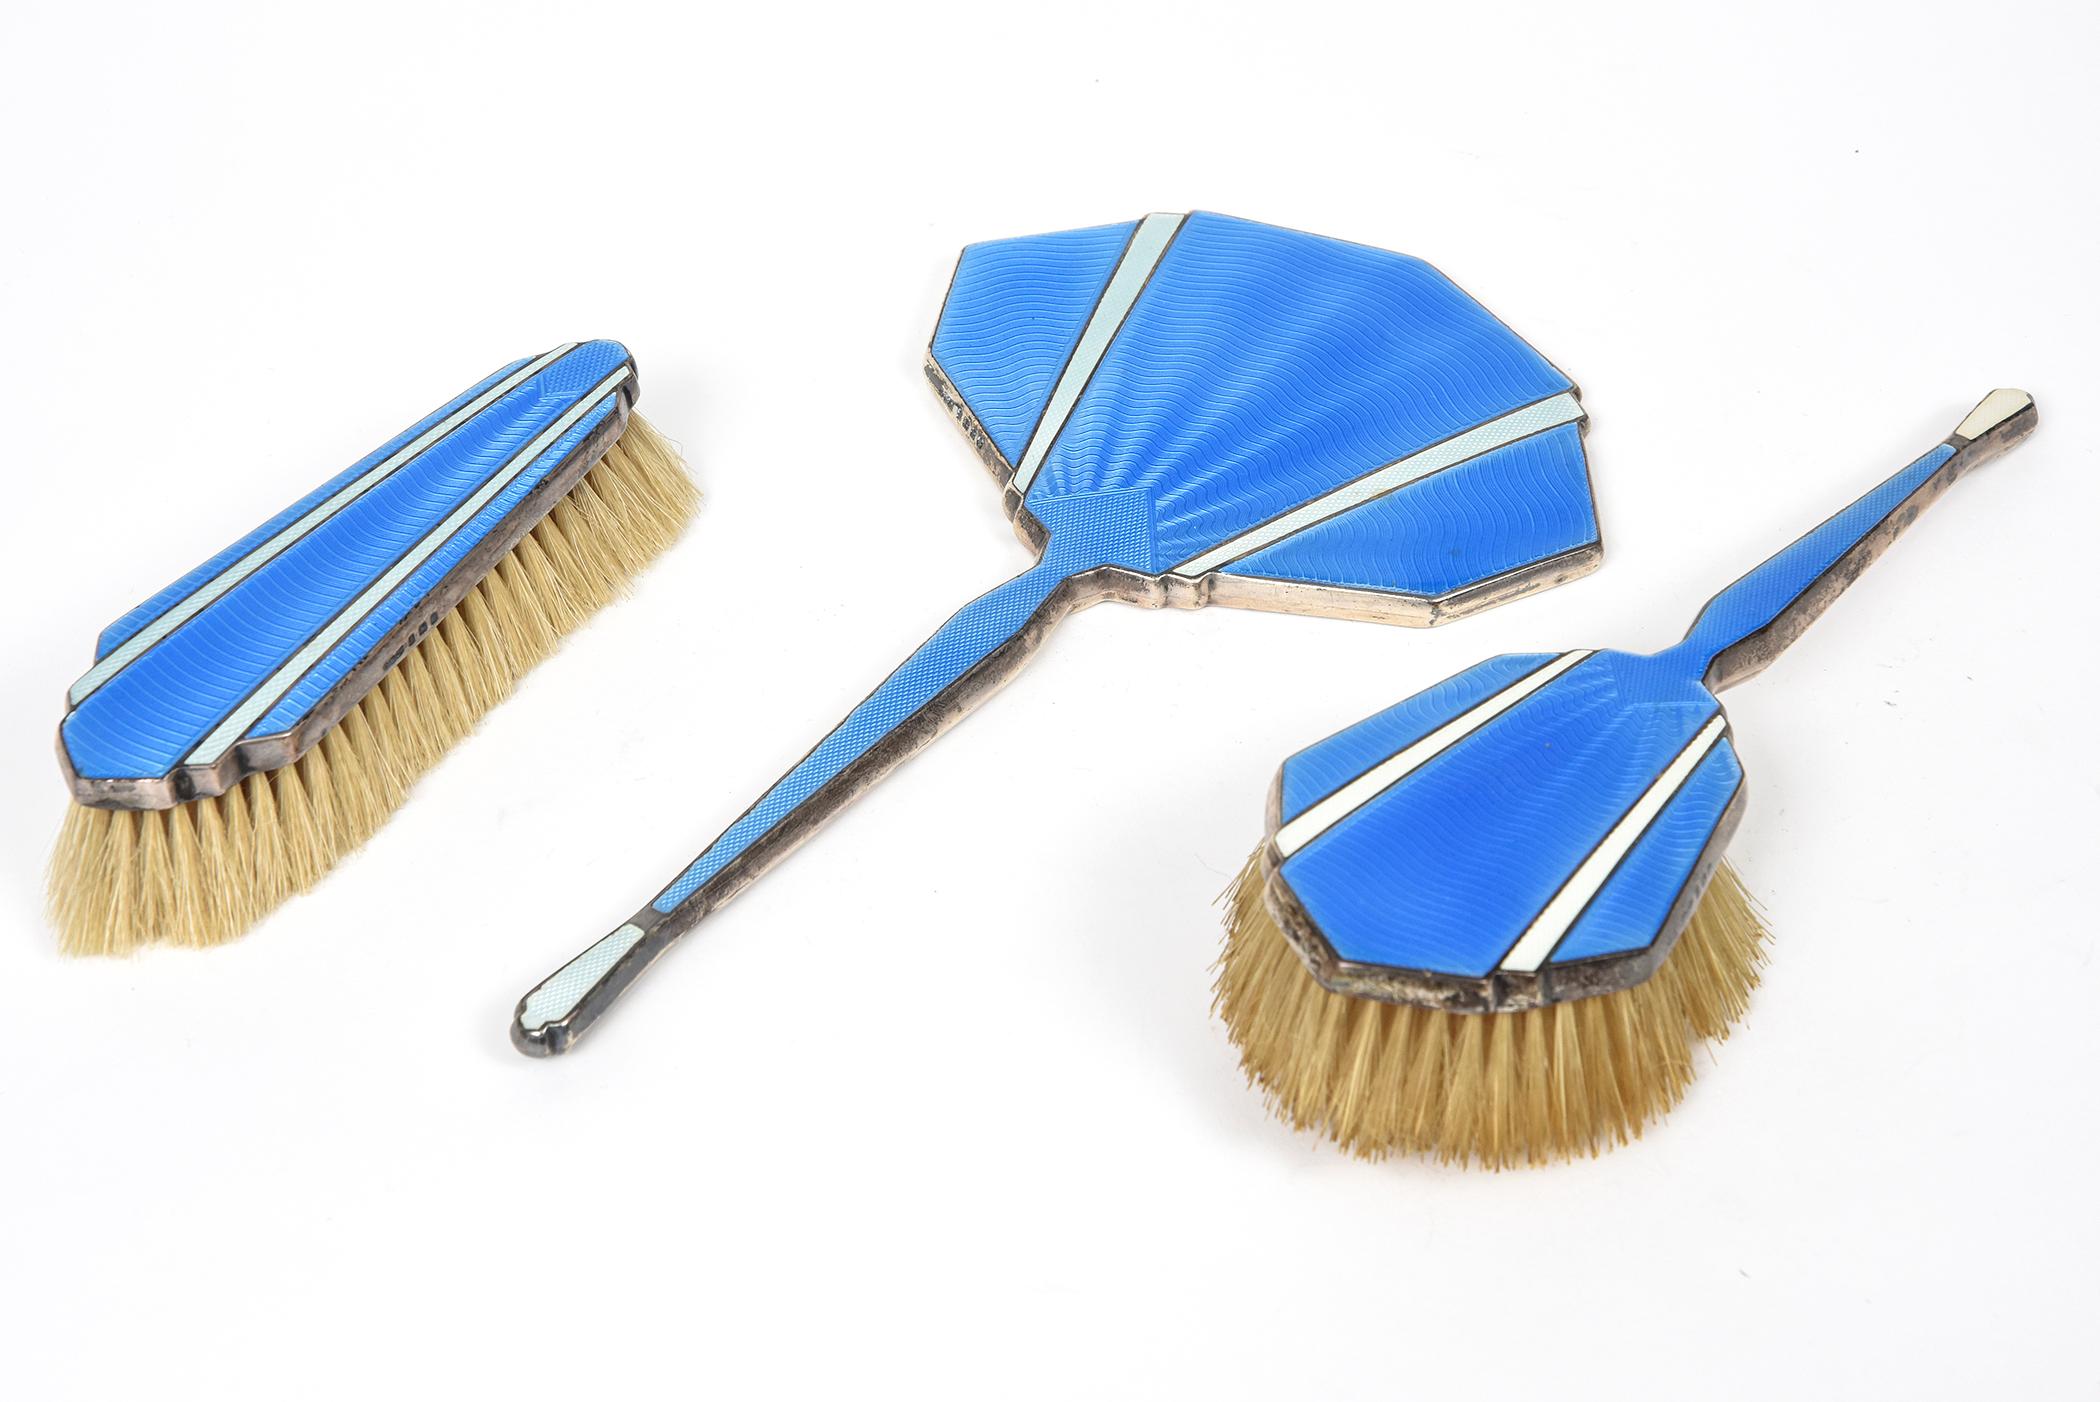 Beautiful blue guilloche enamel and sterling silver three piece brush set featuring a mirror and 2 brushes. This set was made in Birmingham England by D.M. & Co. Davis, Moss & Co. The mirror and the hand held brush are dark blue with a lighter blue